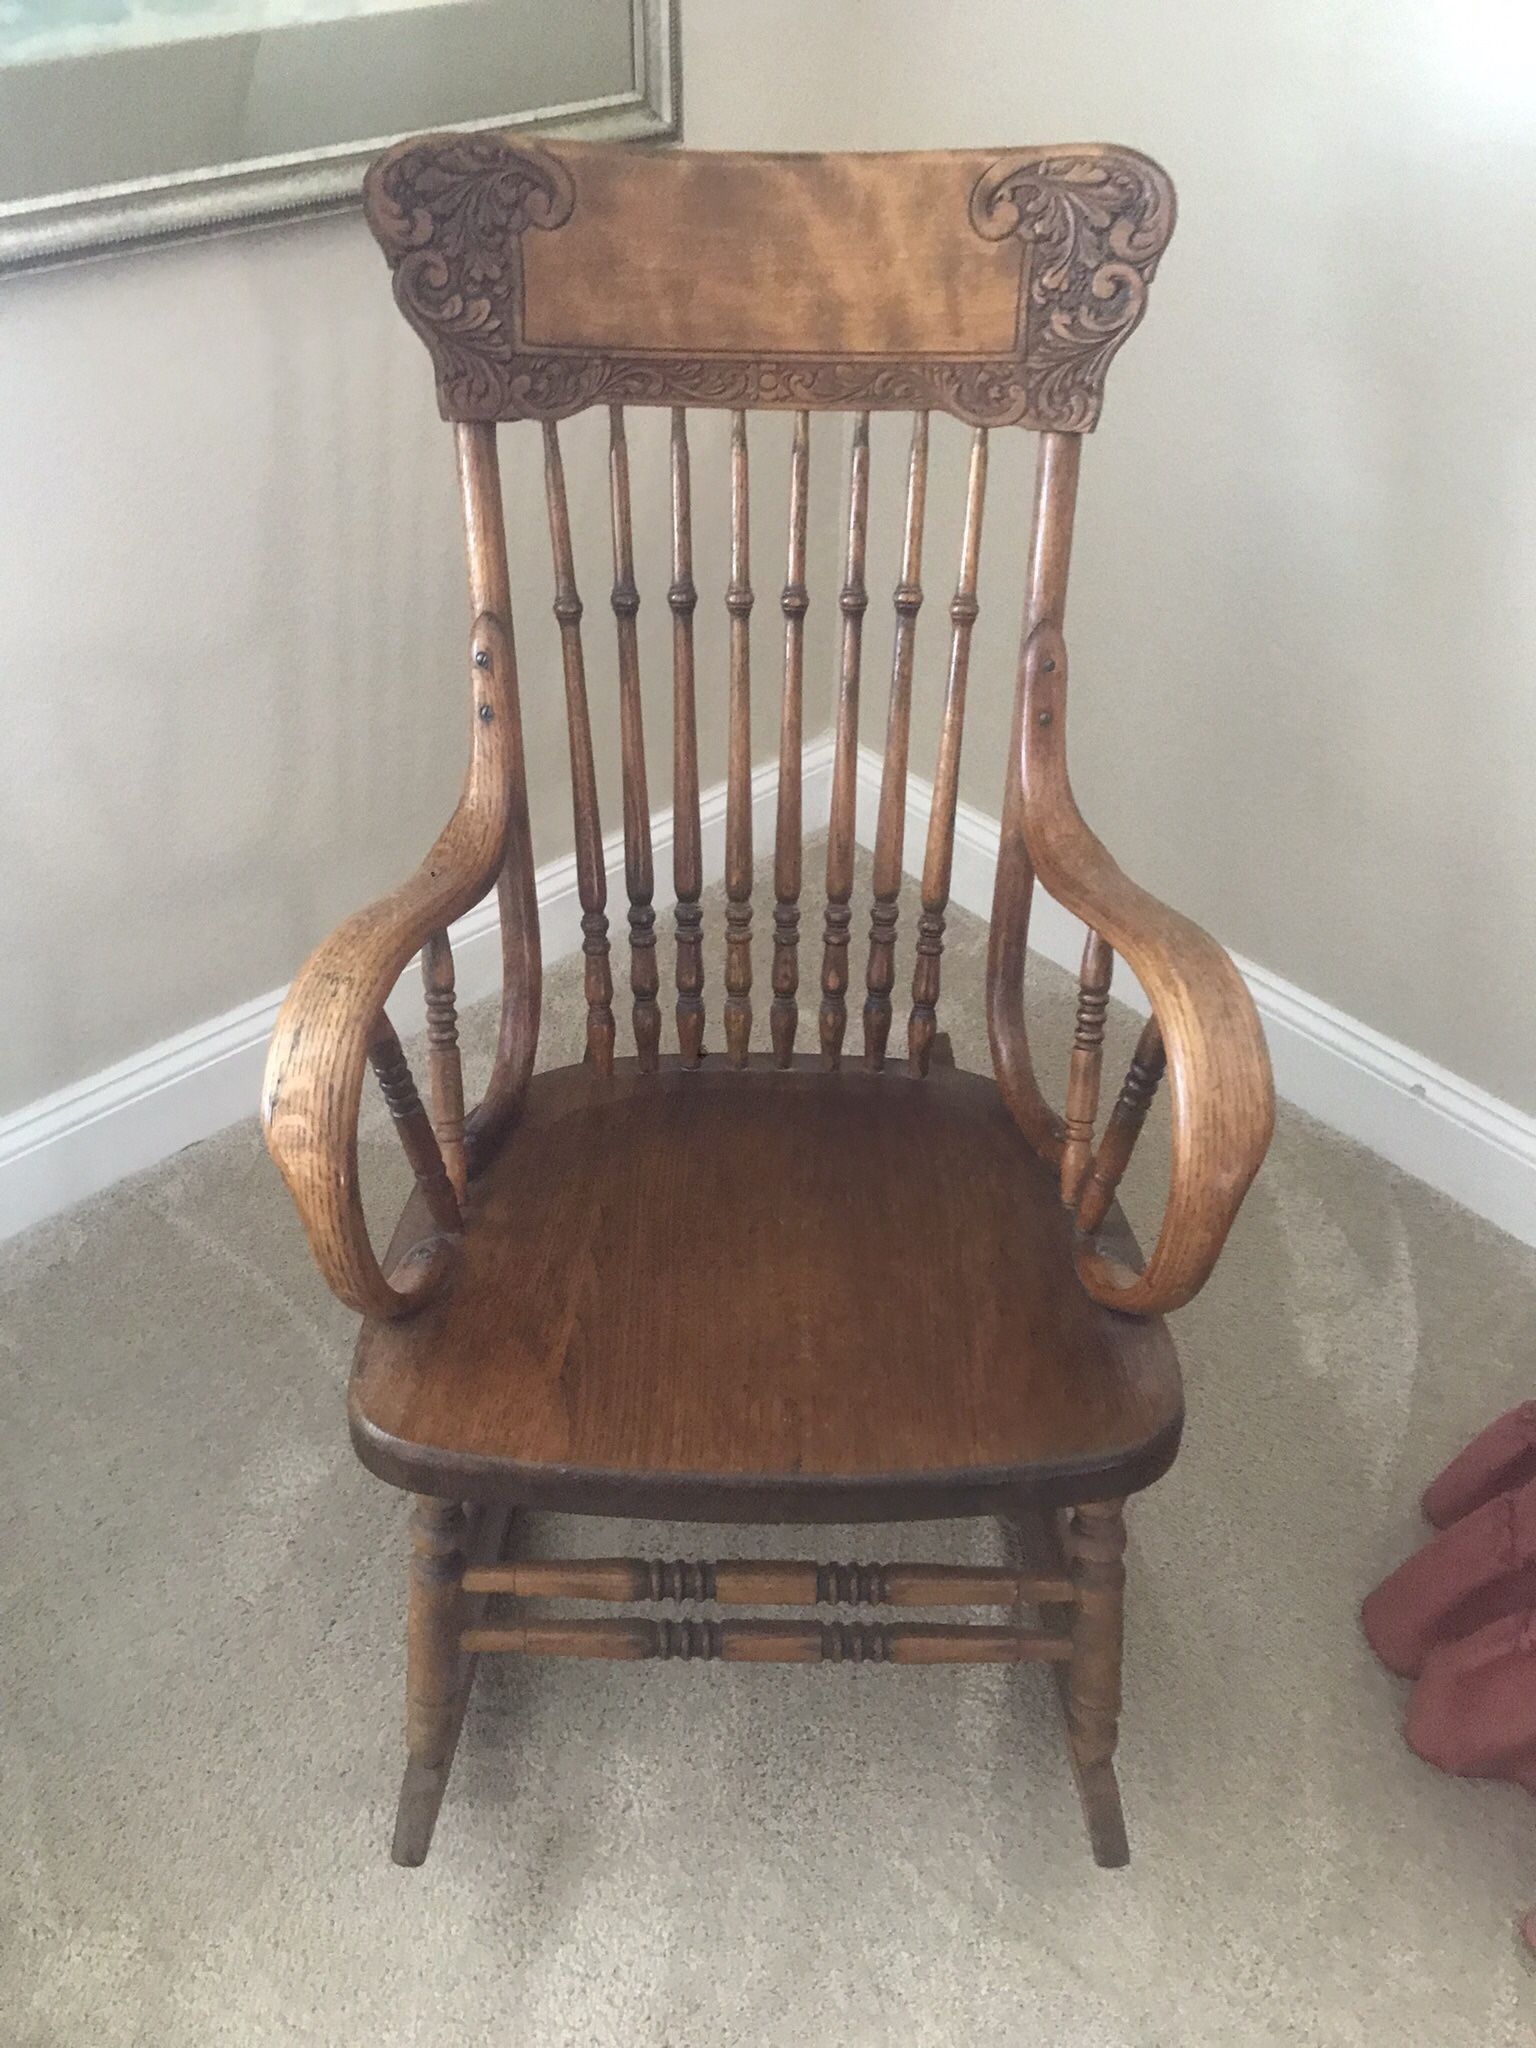 Antique/Vintage S. Bent & Brothers Rocking Chair